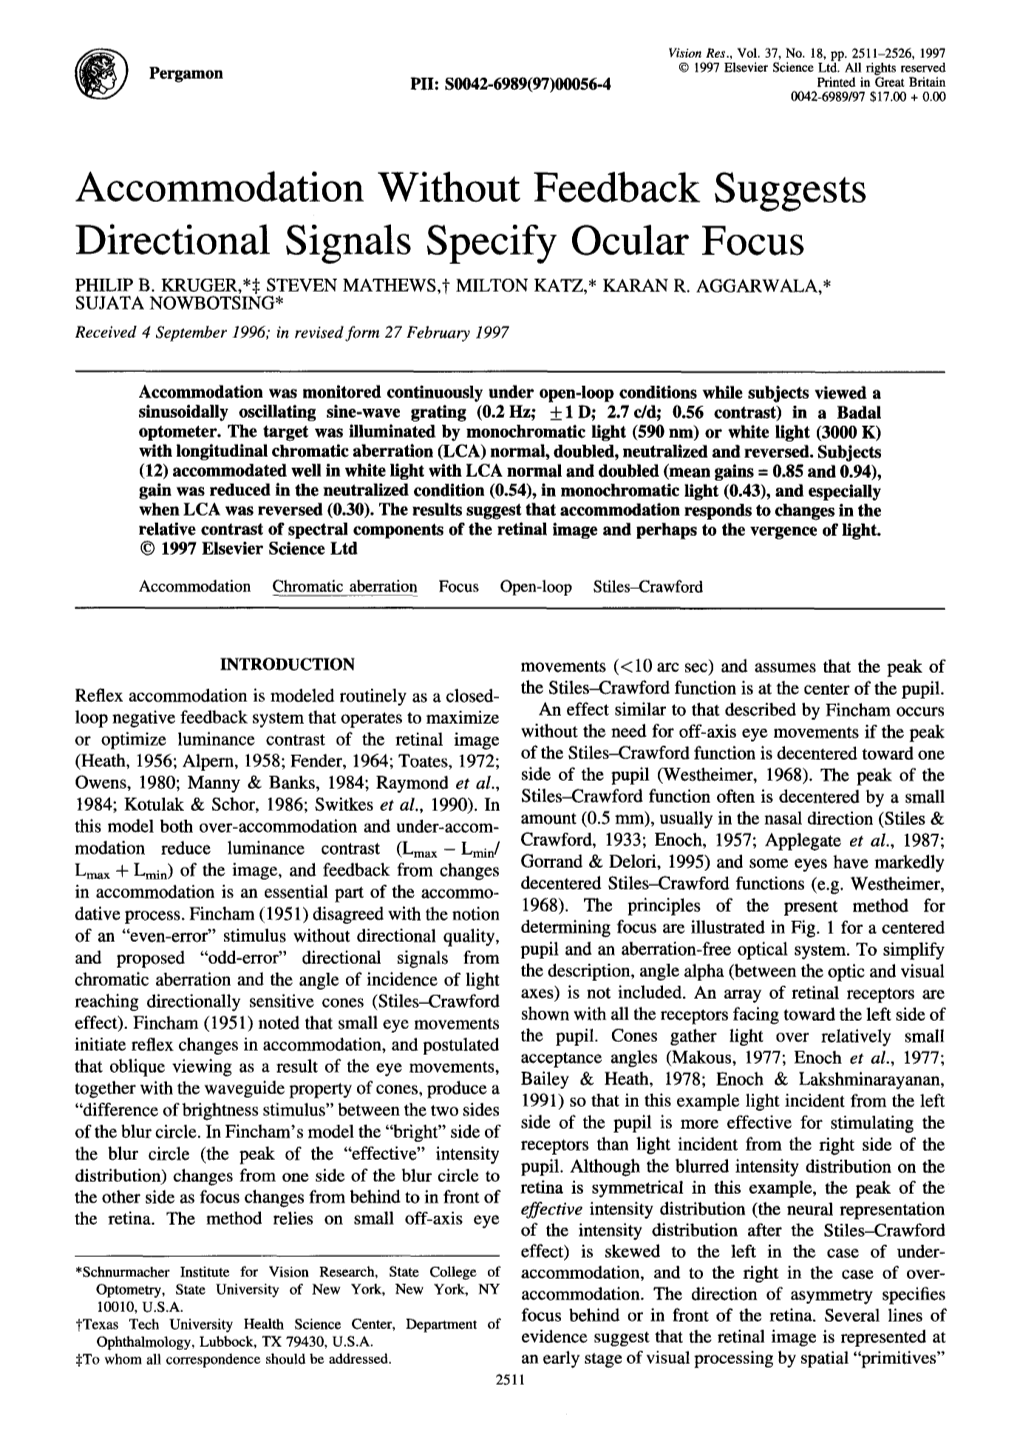 Accommodation Without Feedback Suggests Directional Signals Specify Ocular Focus PHILIP B